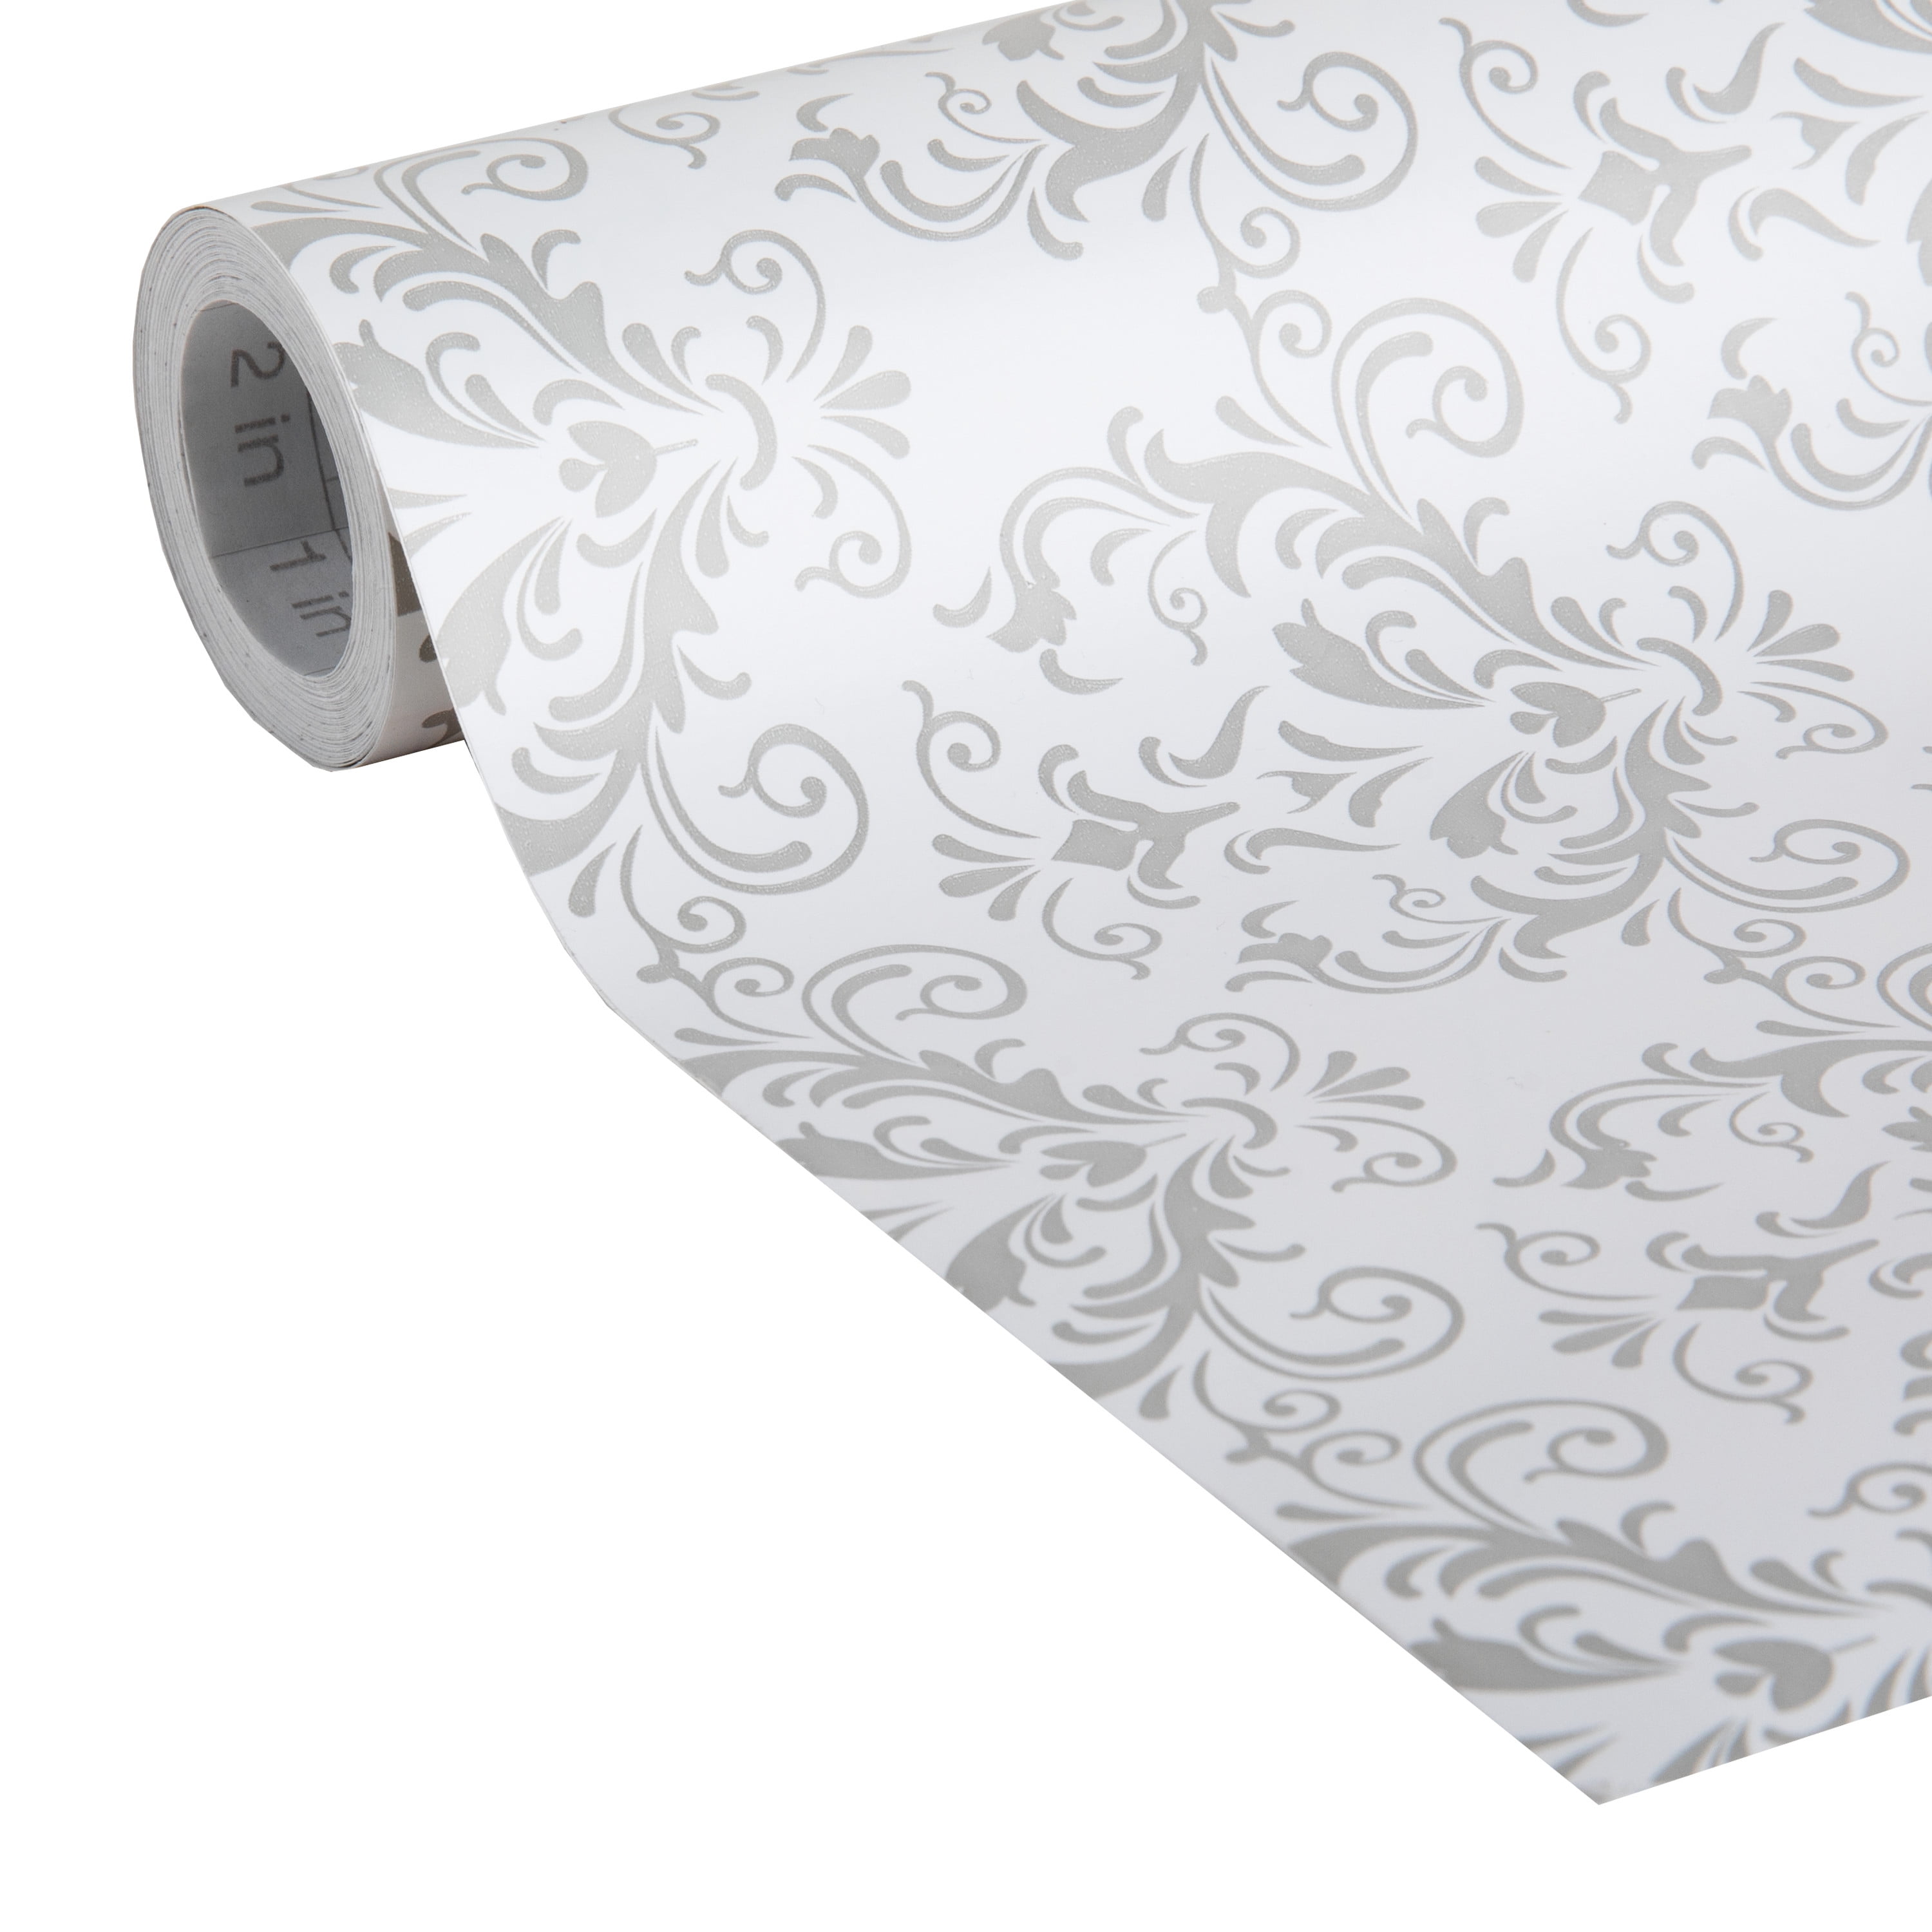 EasyLiner Brand Contact Paper Adhesive Shelf Liner 20 in. x 15 ft., Gray Damask